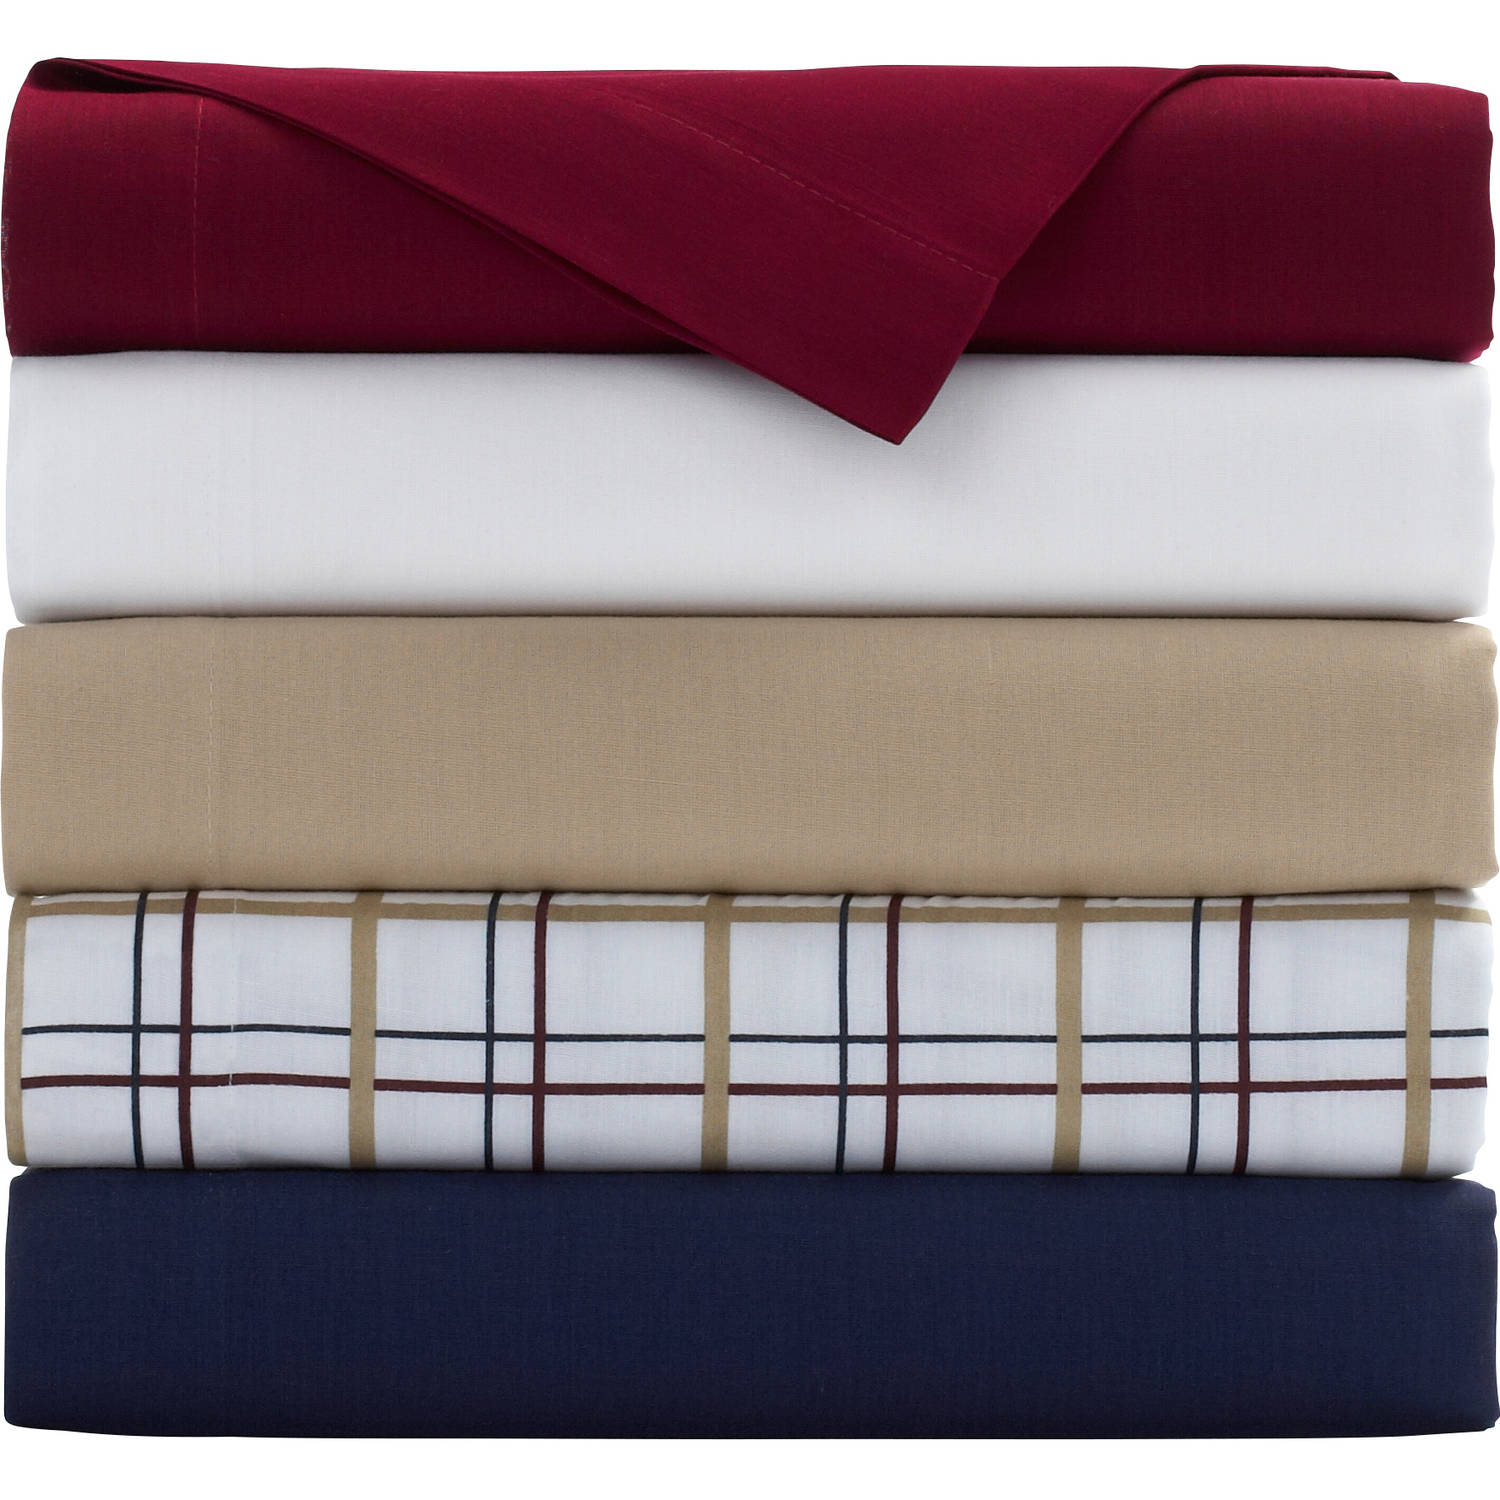 Mainstays 120 Thread Count Bedding Sheet Set - image 2 of 2